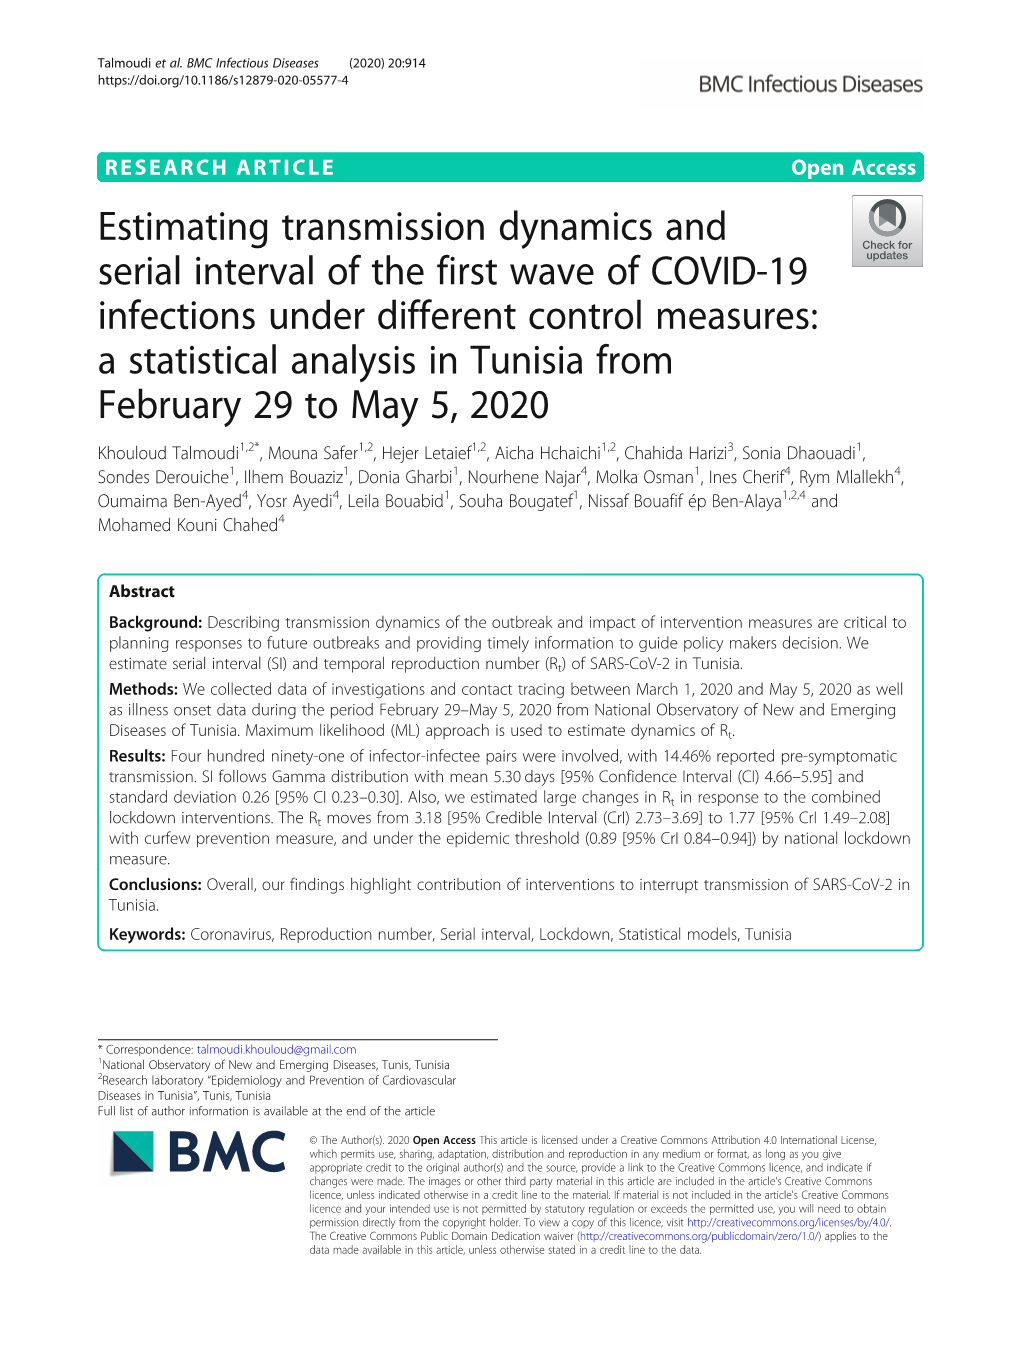 Estimating Transmission Dynamics and Serial Interval of the First Wave Of